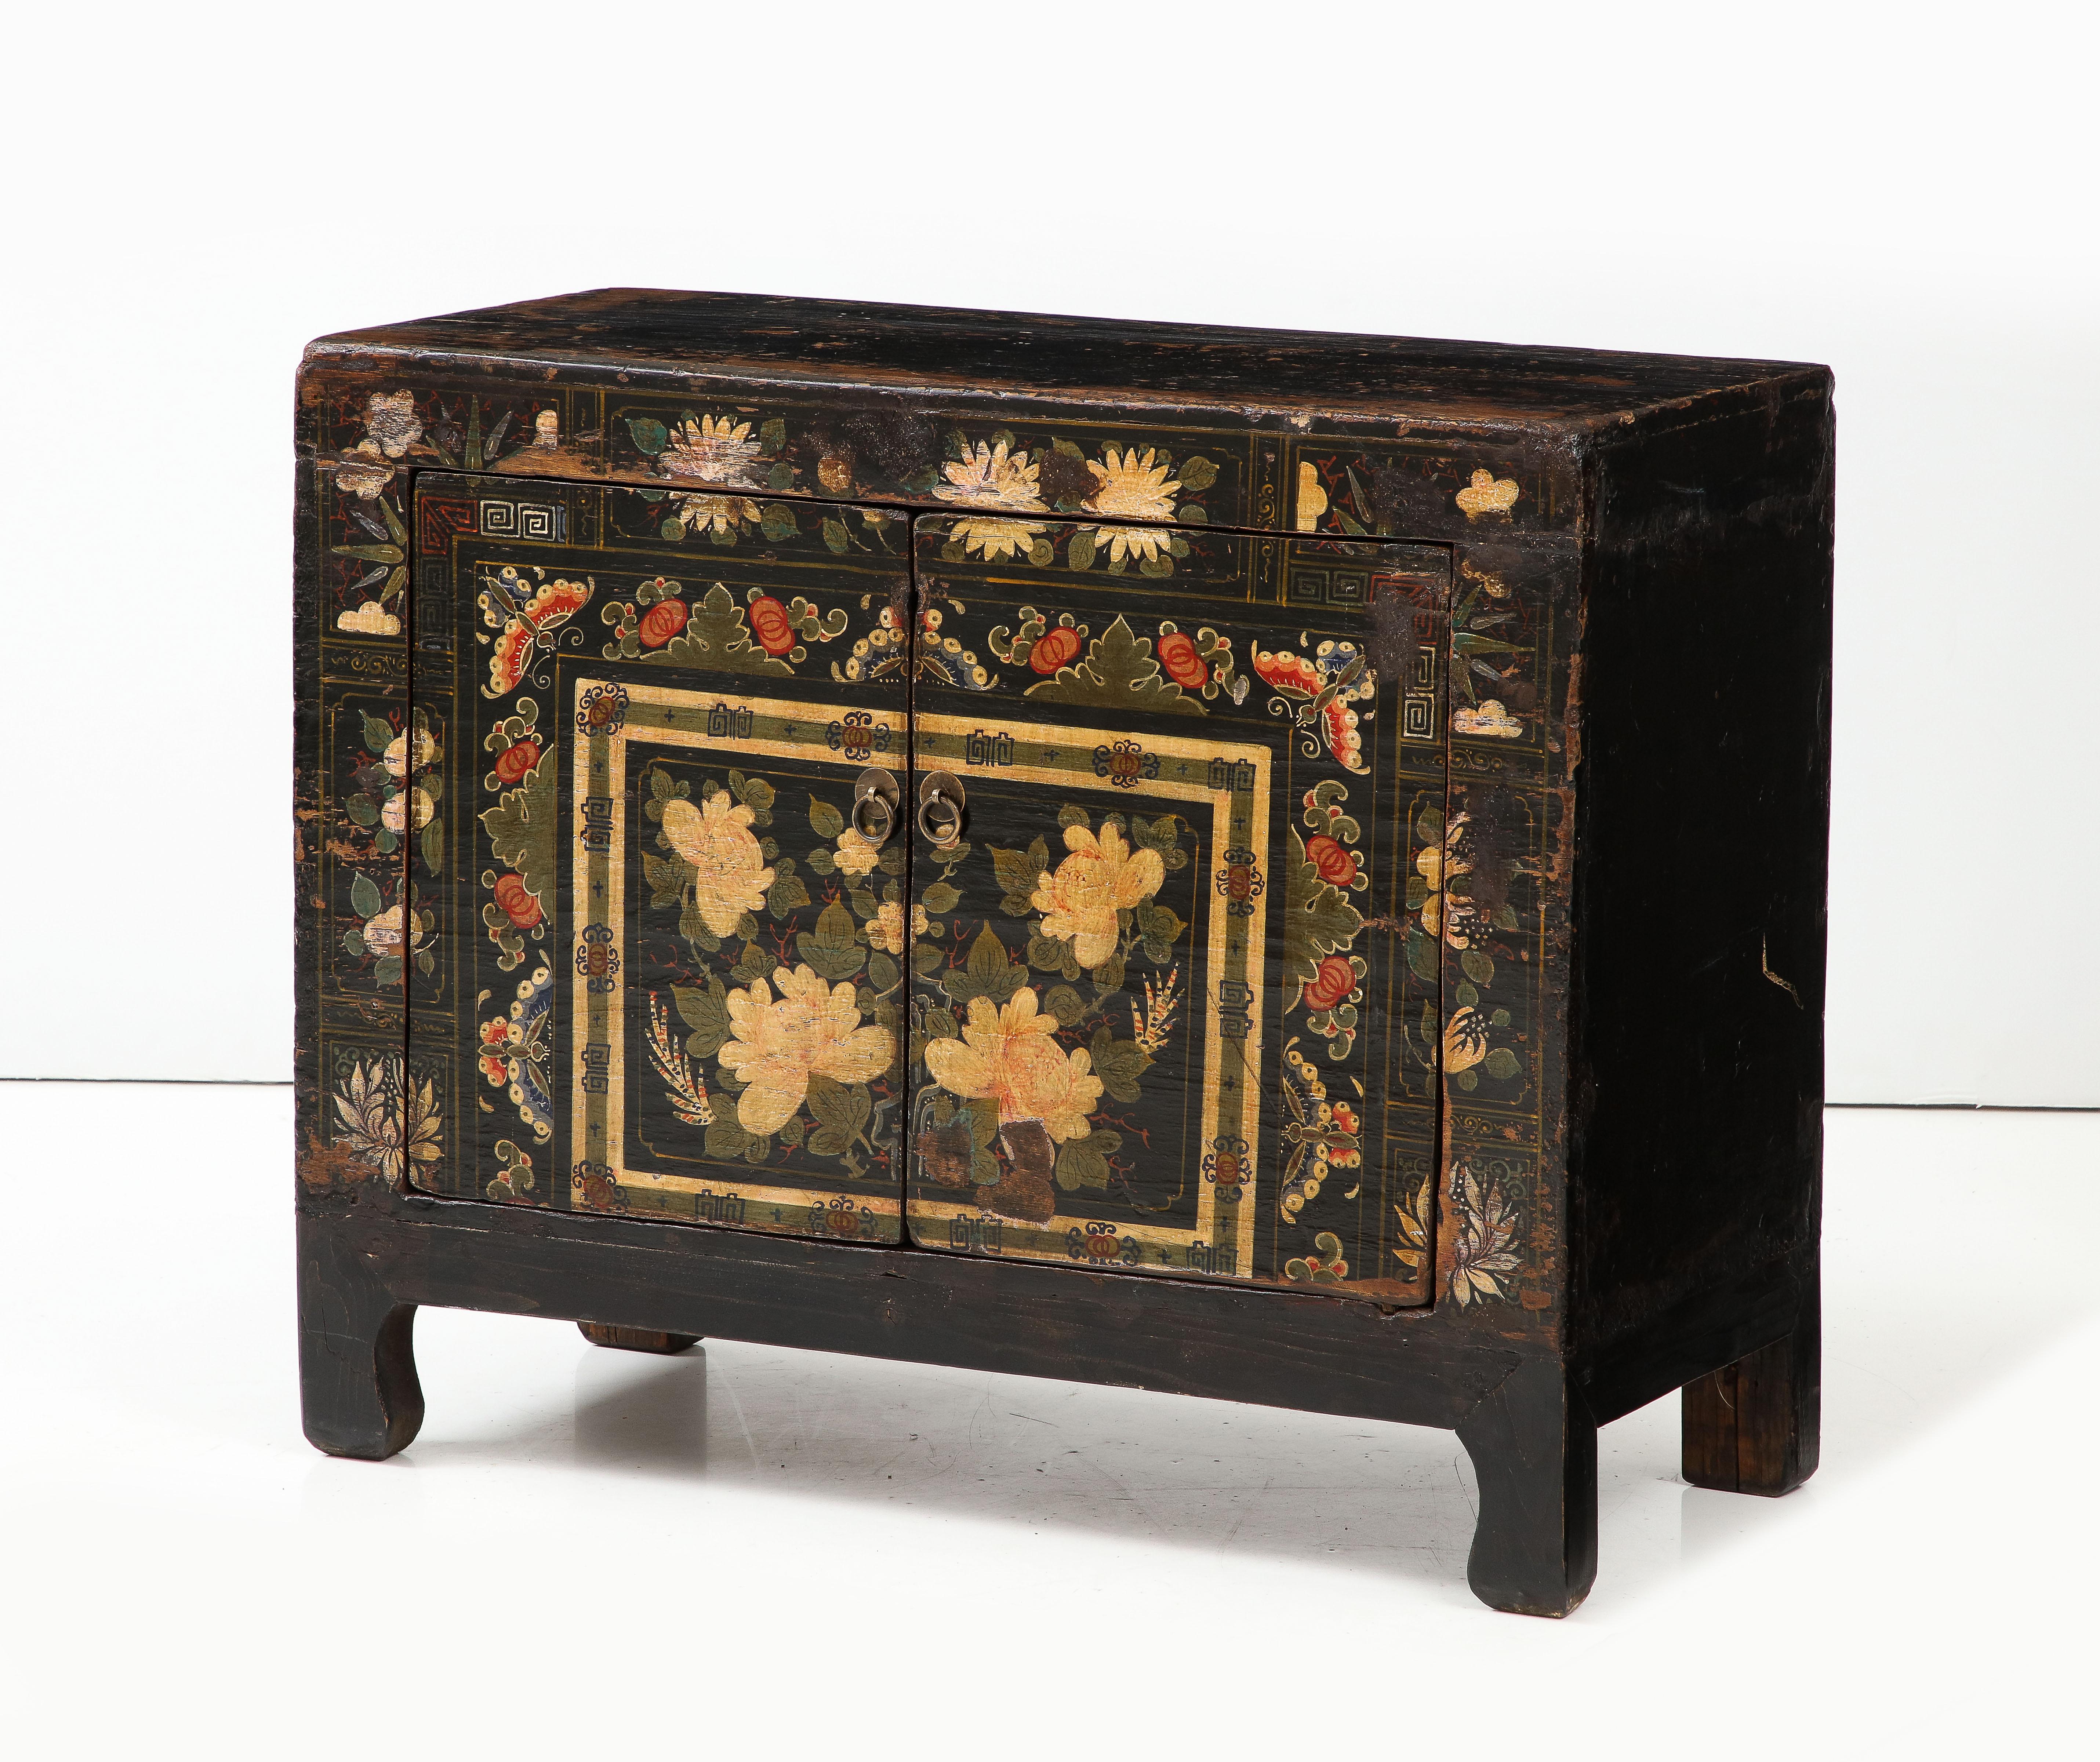 This is the kind of special piece that adds character and personality to a home.  This small cabinet is painted in a black ground color, and is beautifully decorated in a floral design in shades of gold, red and green, accented with a painted Greek